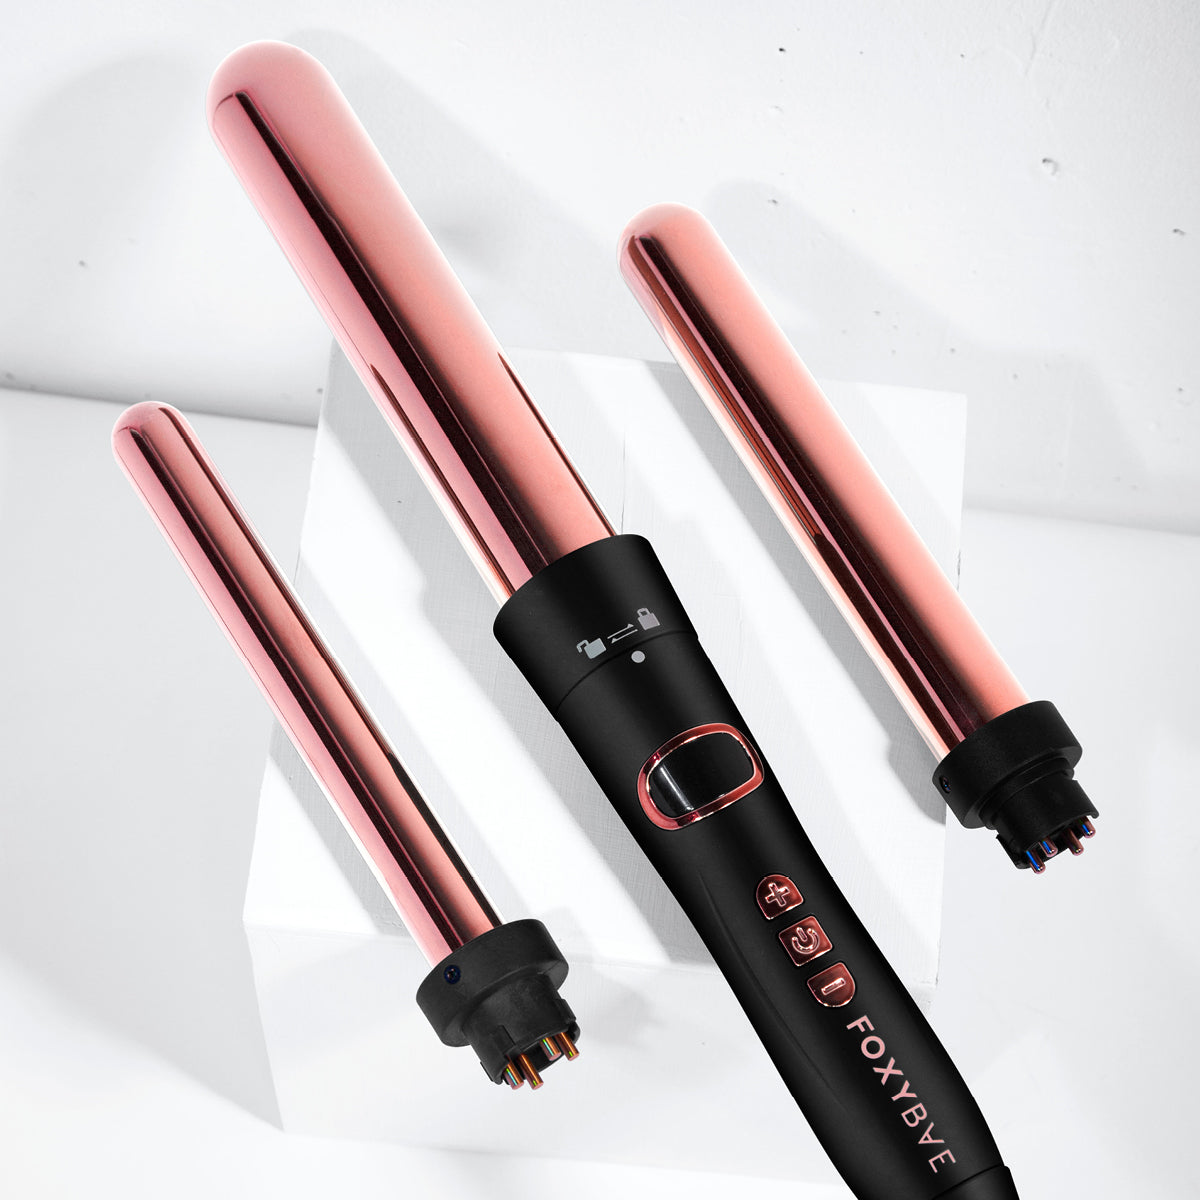 24hr Exclusives Rose Gold 3-in-1 Curling Wand $65